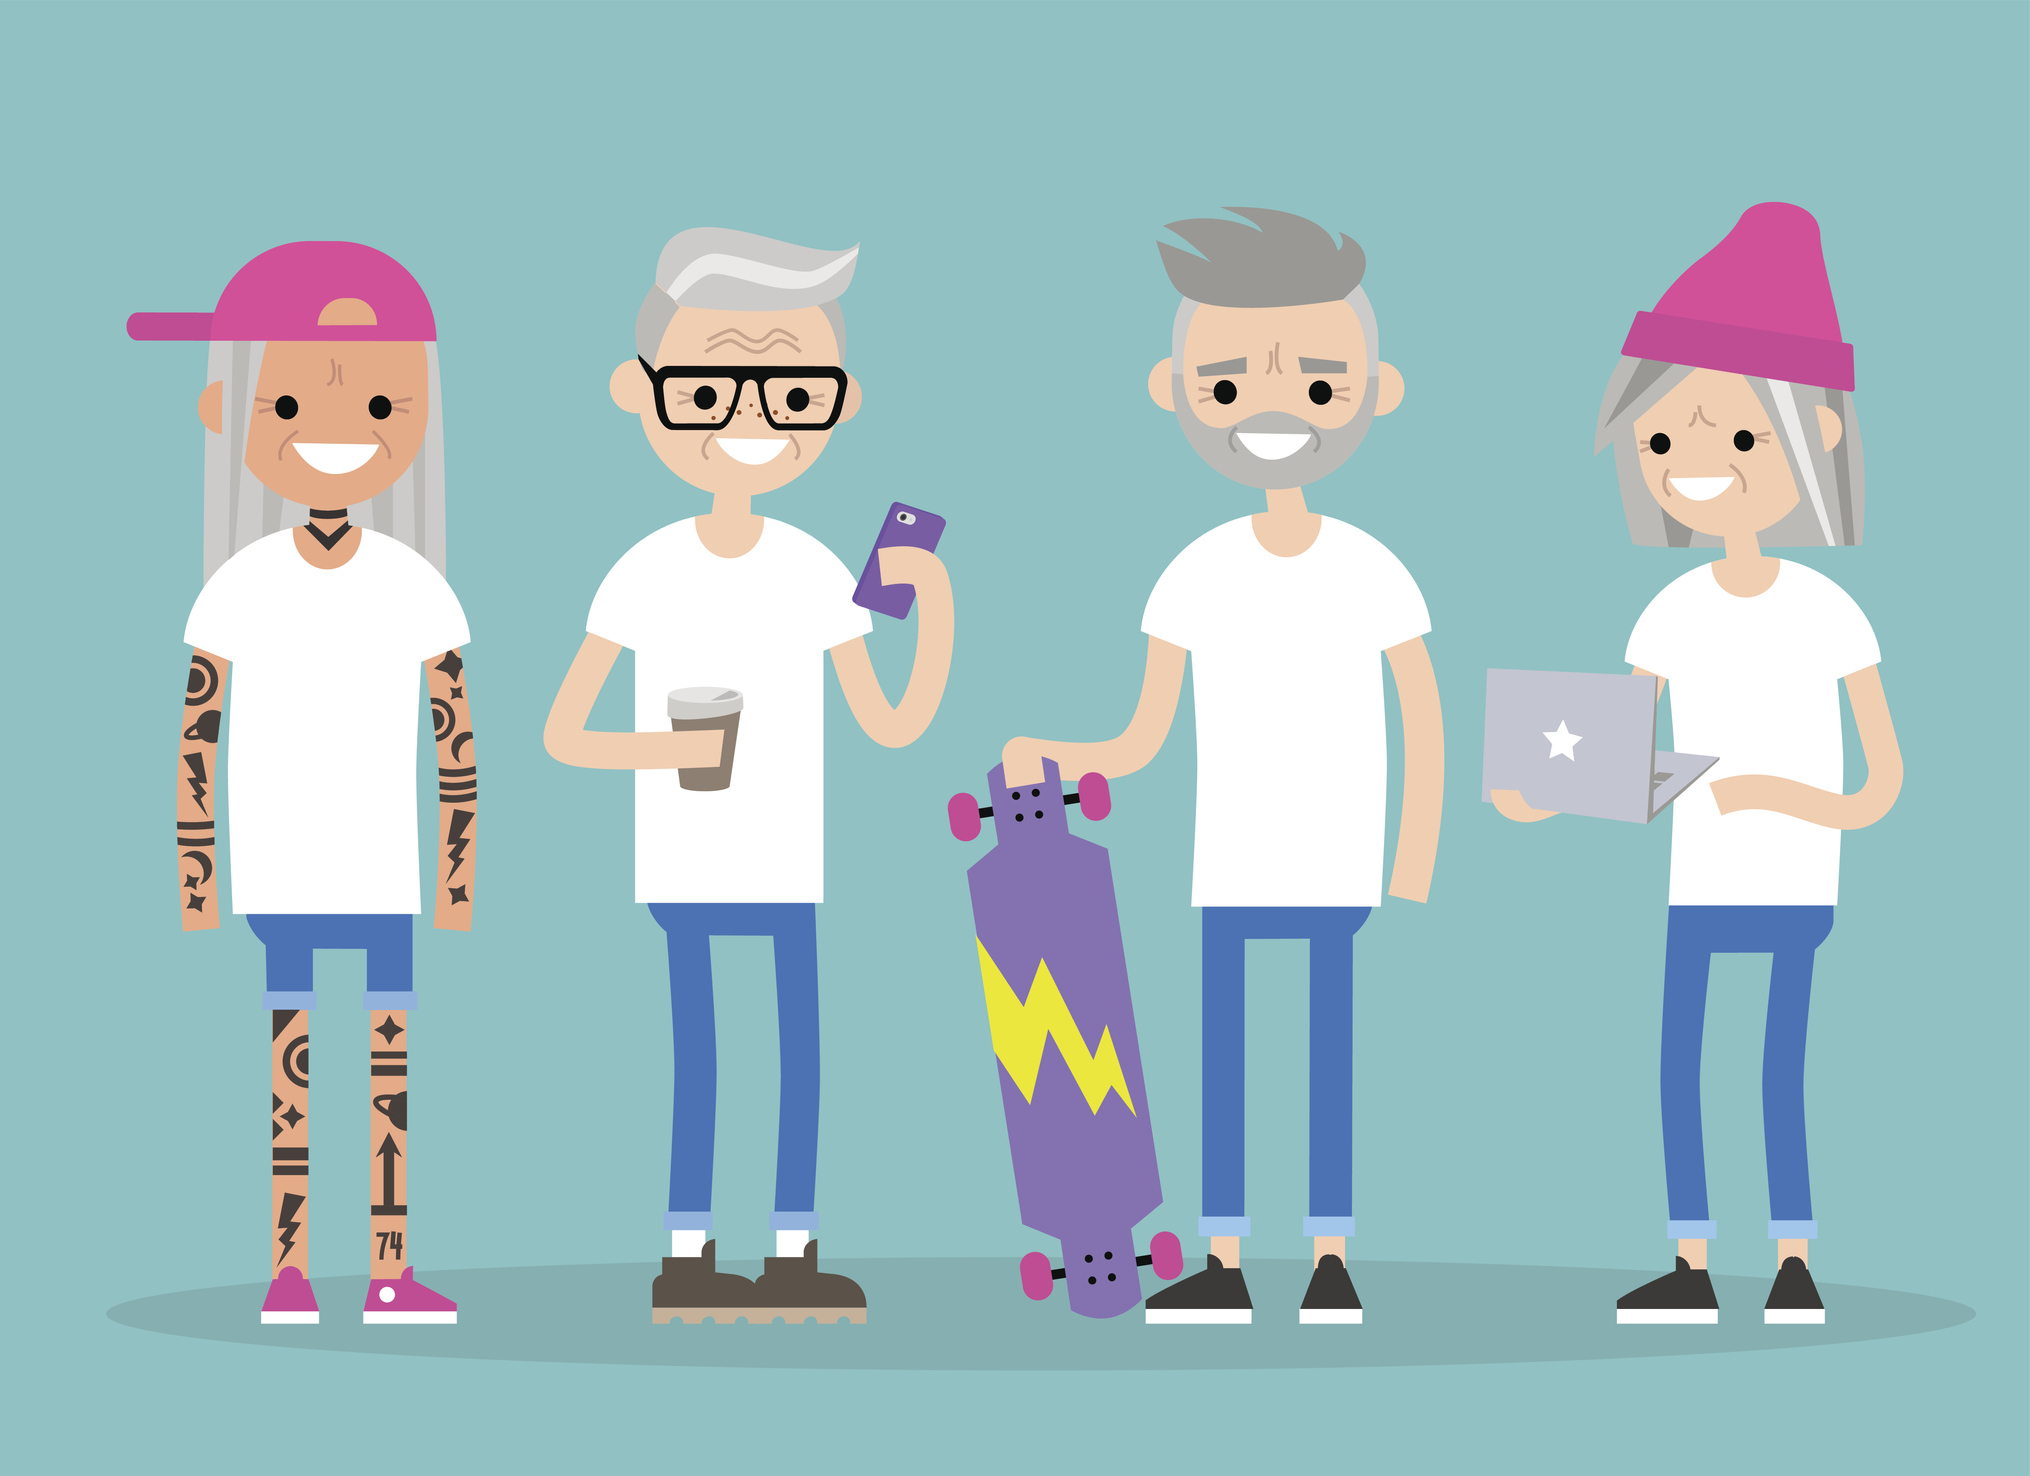 graphic of older people with gray hair holding skateboards, laptops, wearing beanies, and backwards hats